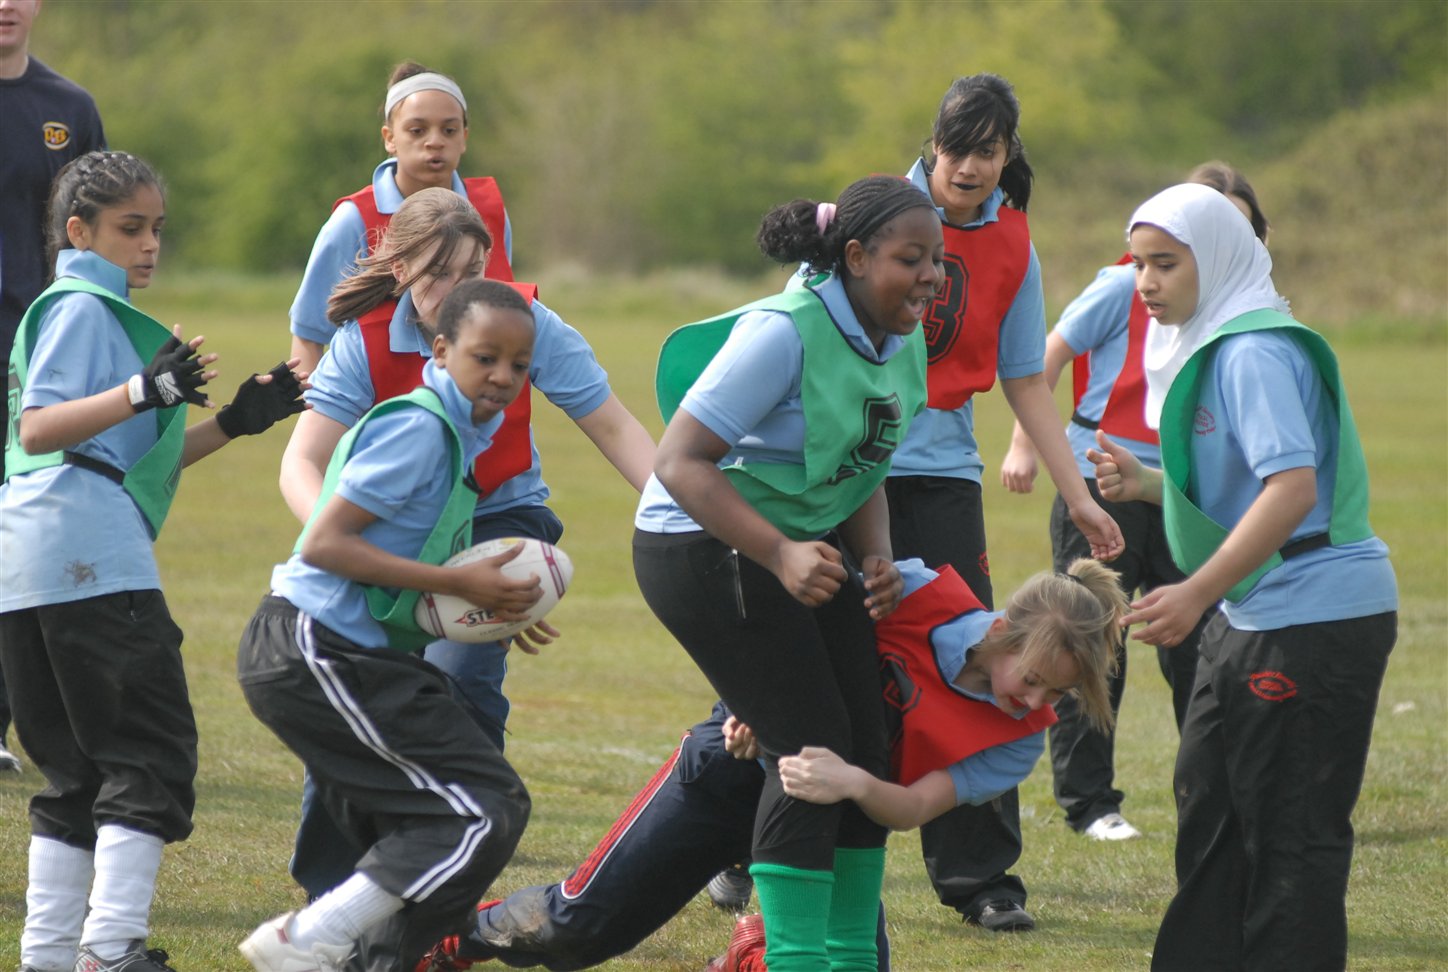 Girls playing rugby (Women in Sport/PA)